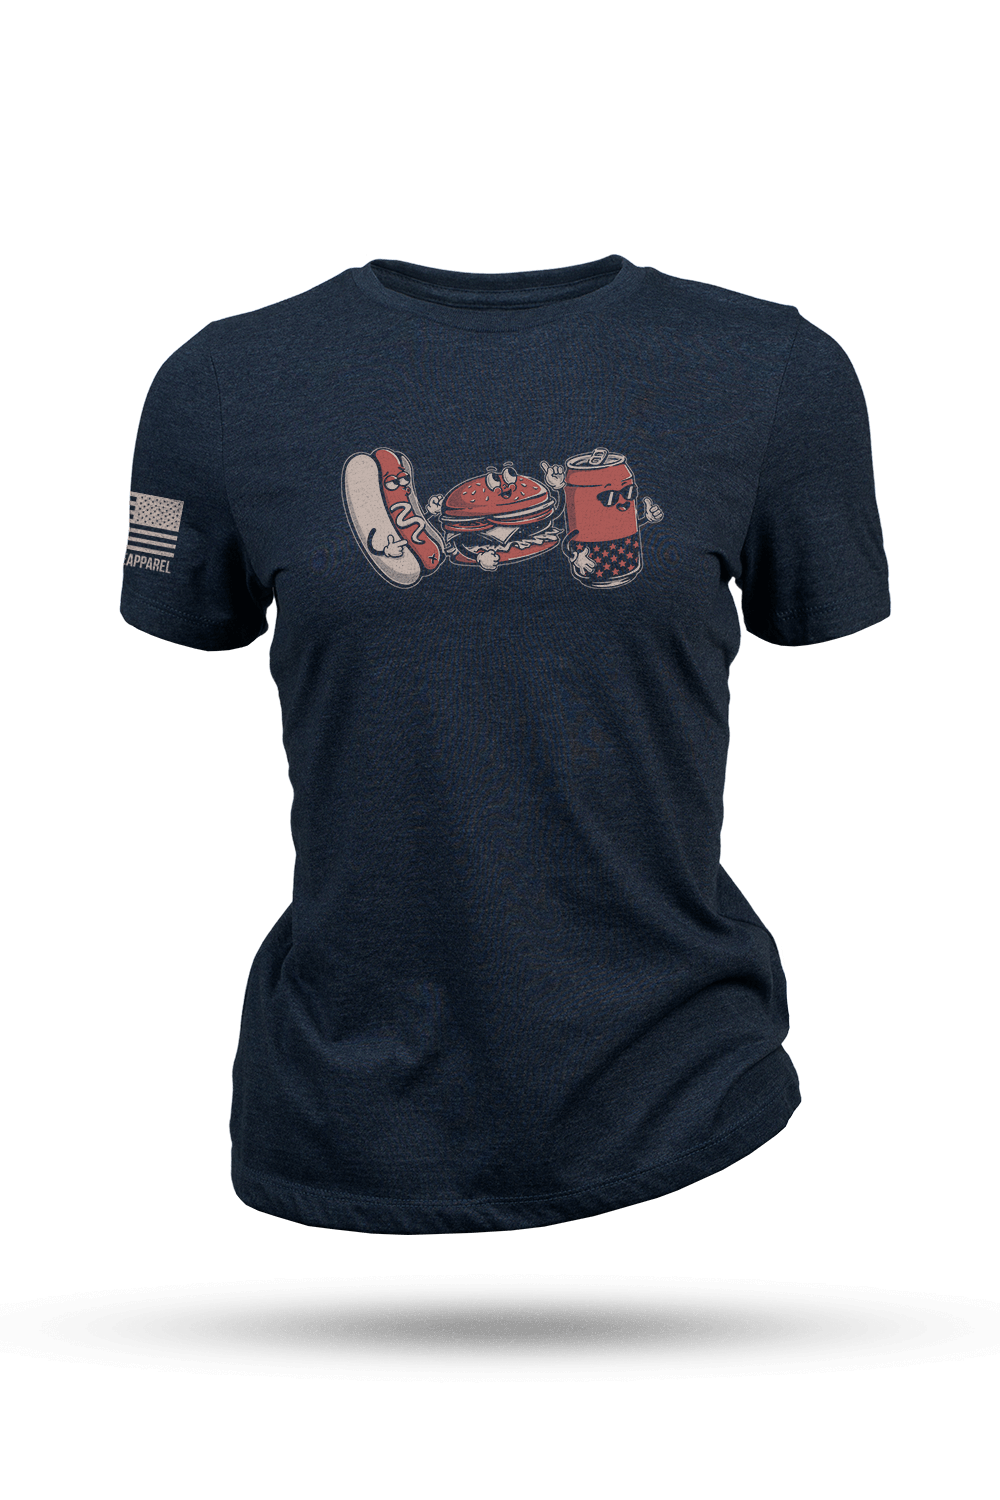 Women's T - Shirt - Let's All Go To The BBQ